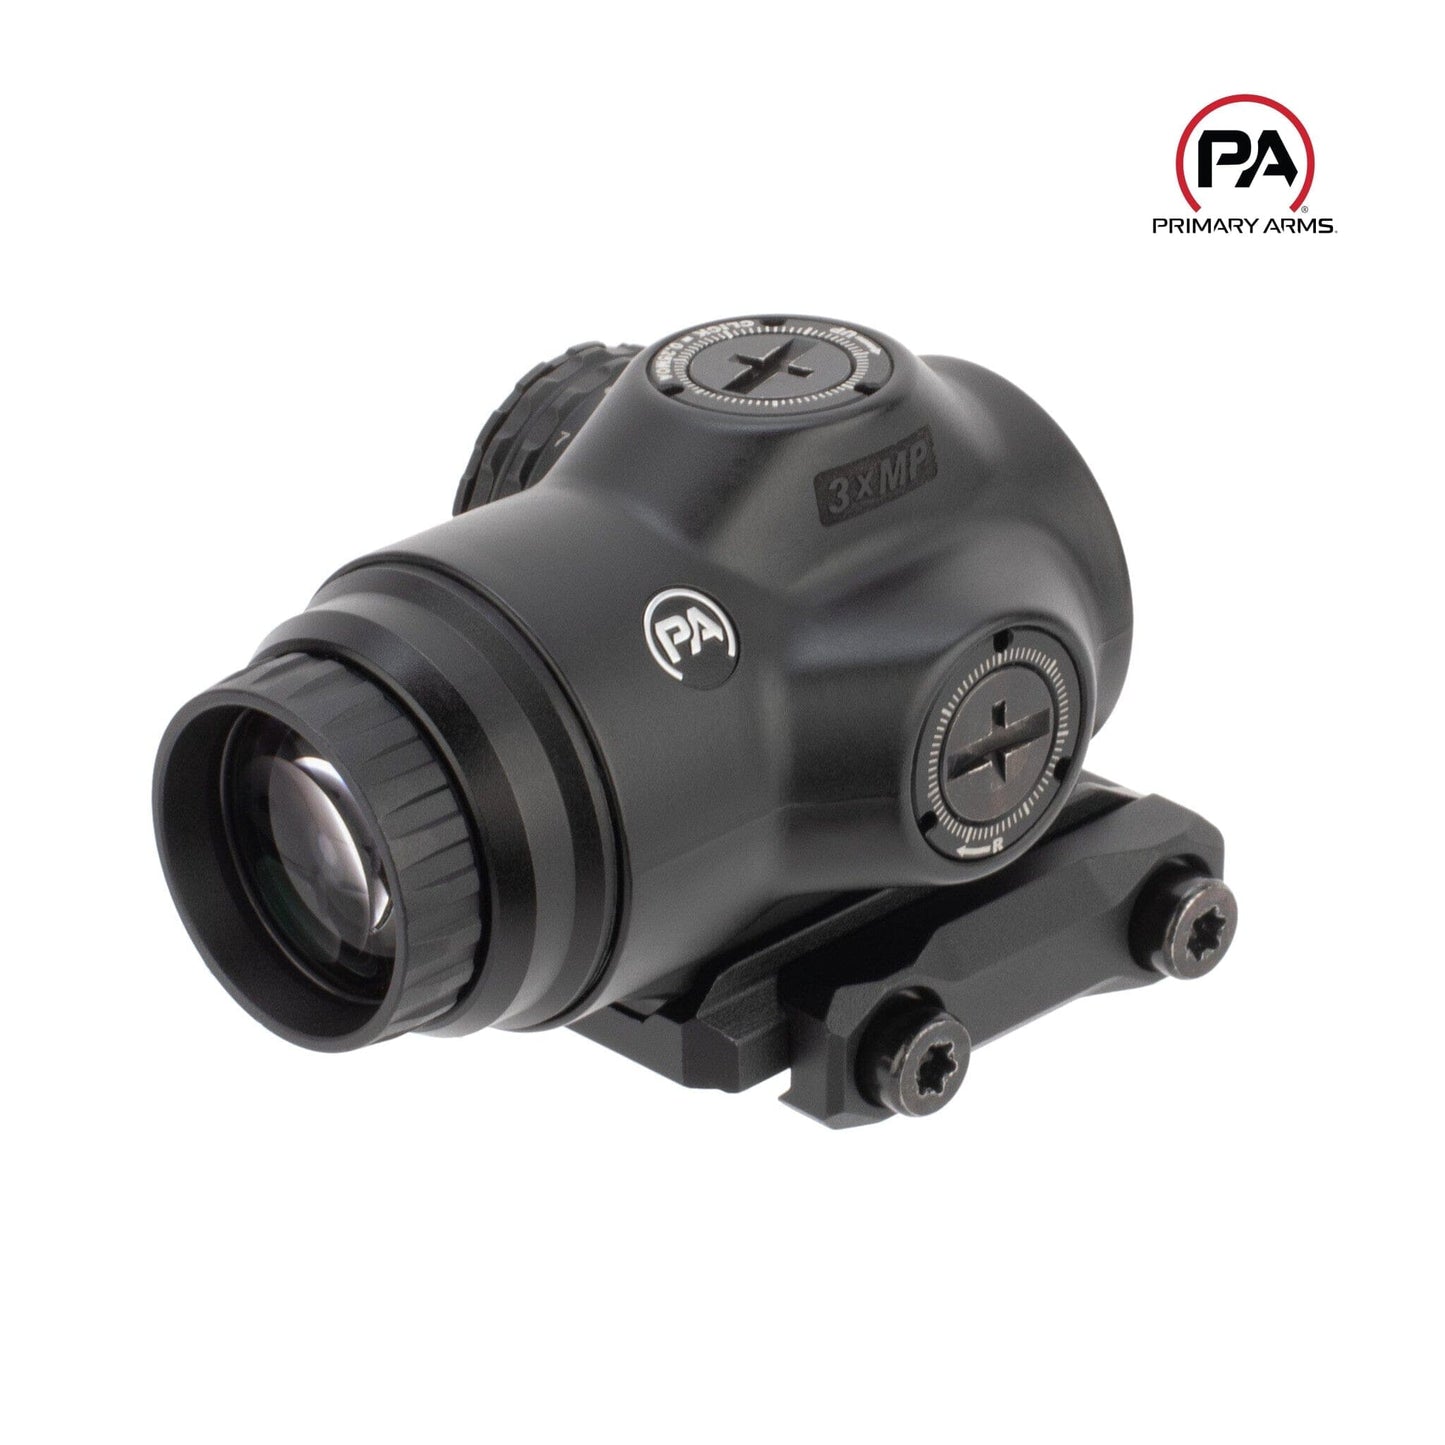 Primary Arms SLx 3x MicroPrism Sight - Red ACSS Raptor 7.62x39/.300 BLK - Yard Reticle Prism Rifle Scope Primary Arms 